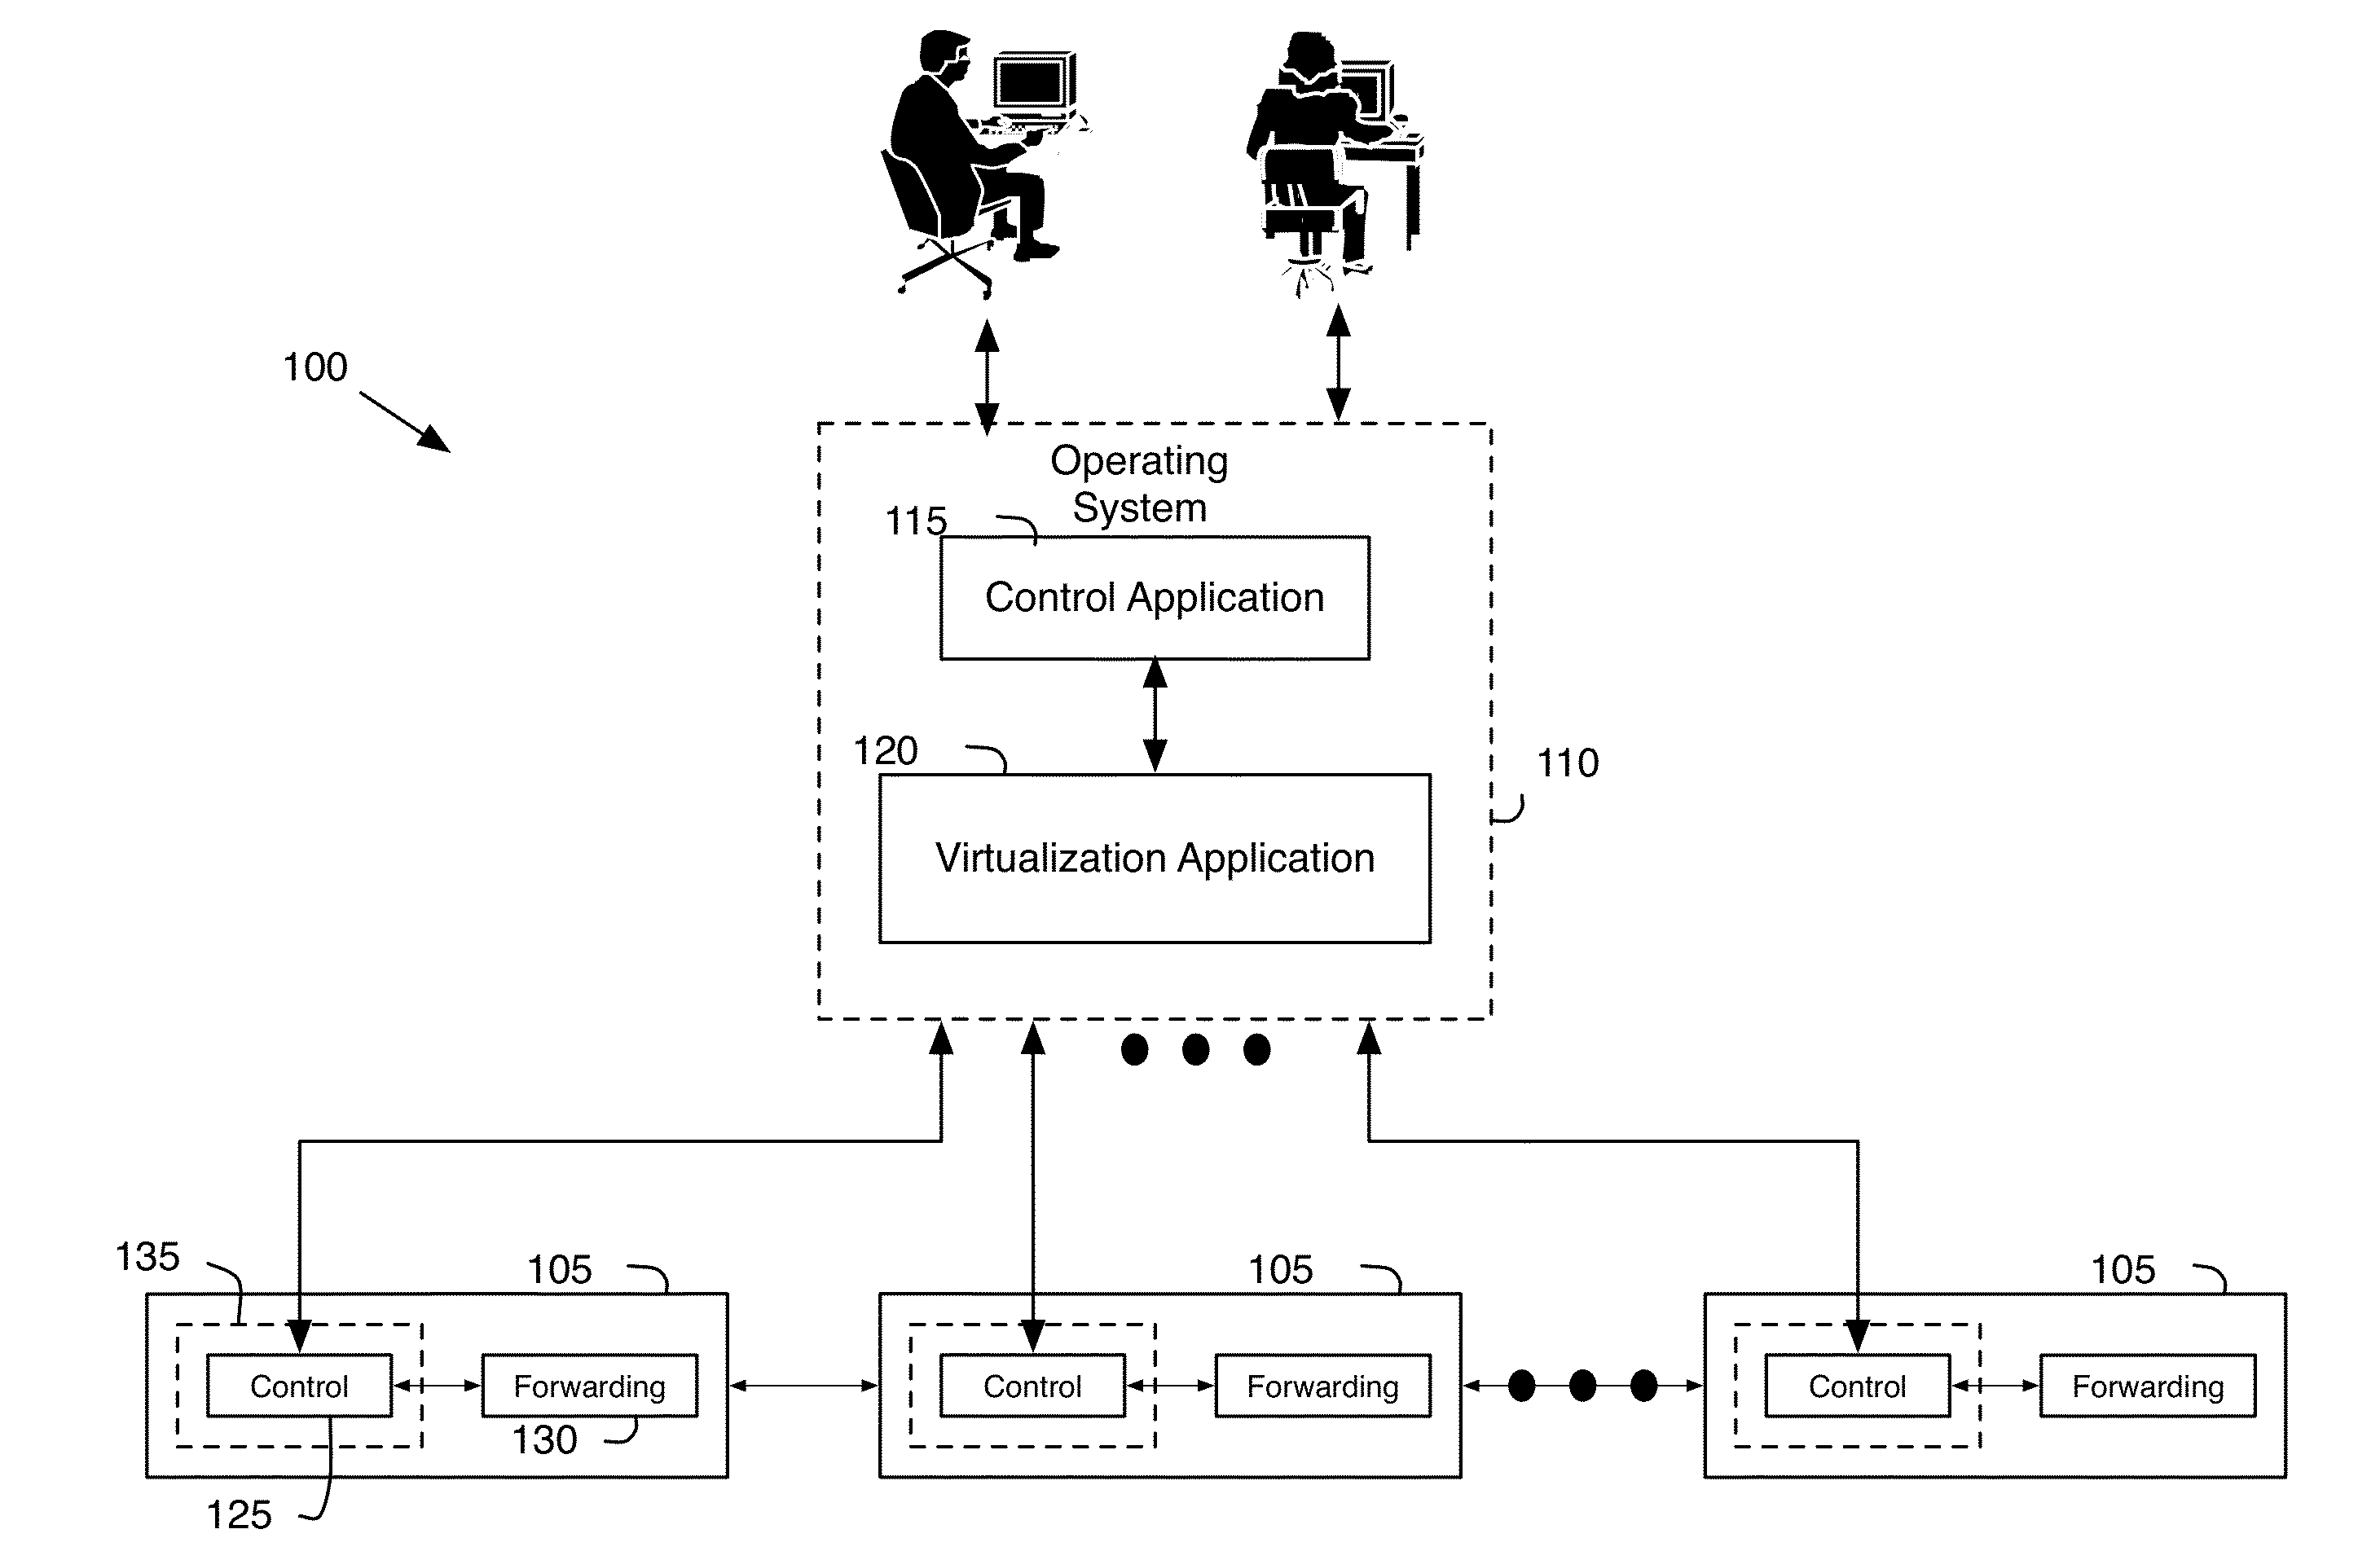 Maintaining quality of service in shared forwarding elements managed by a network control system